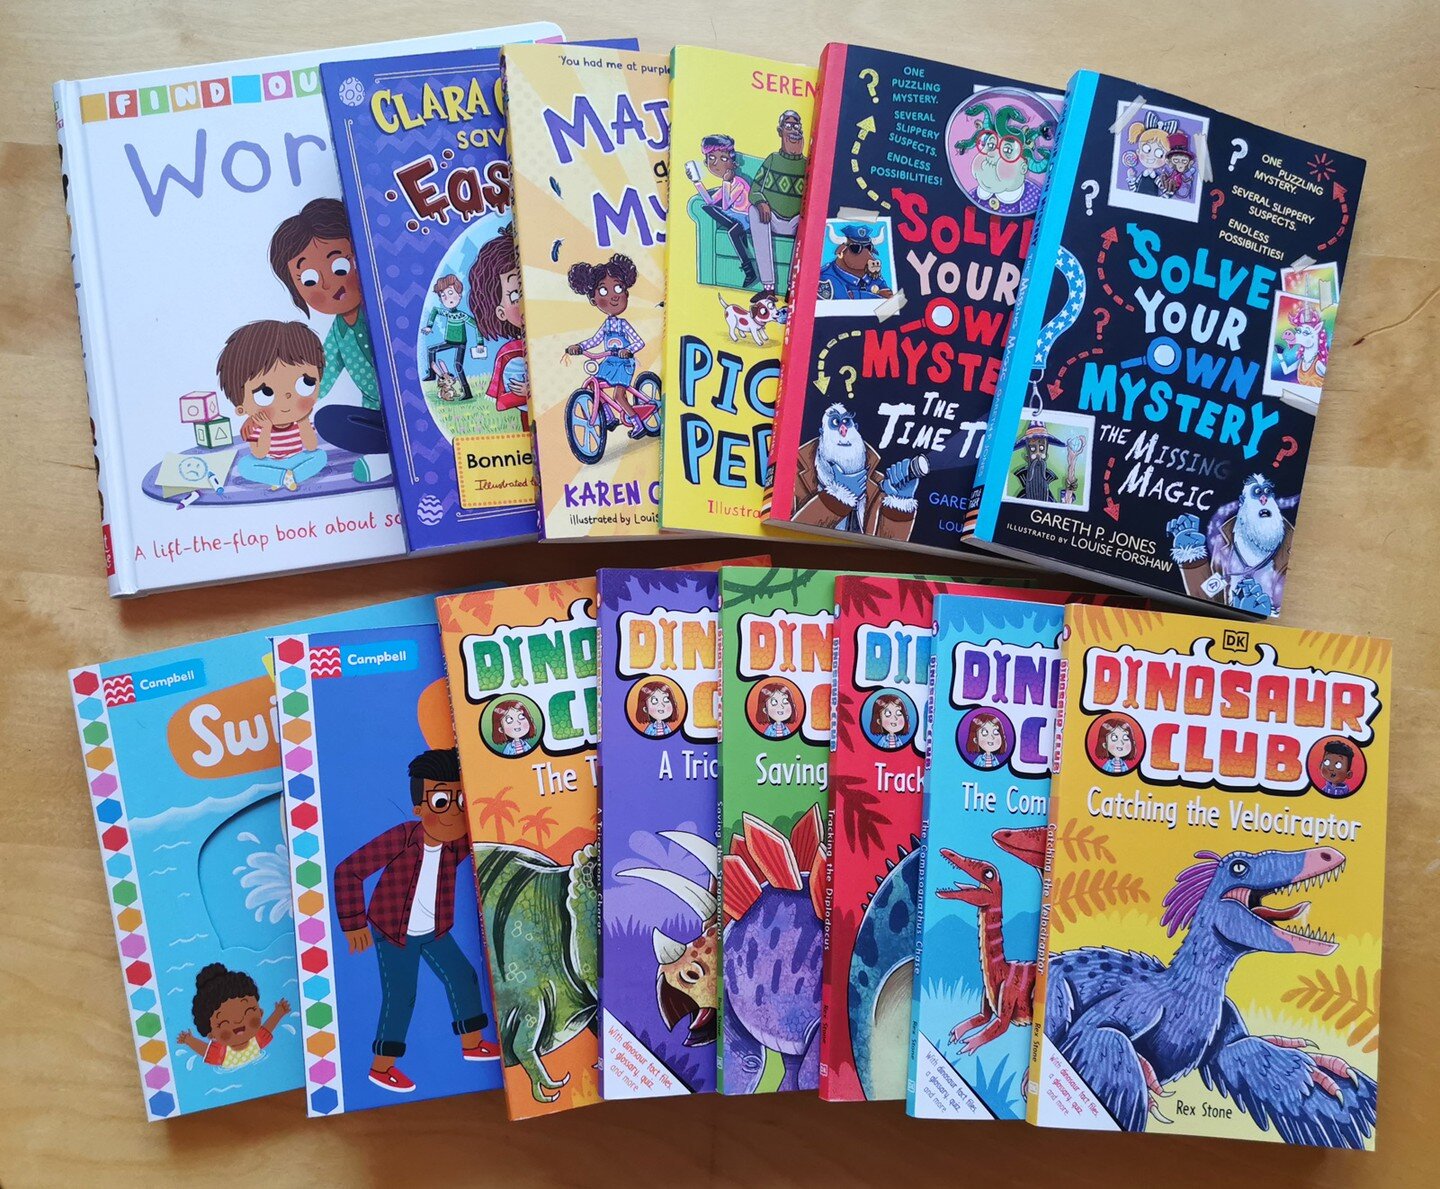 Books of 2022! All of these books published this year, illustrated by me (AKA a burned out illustrator) 😅
Thanks as always to the wonderful authors and publishers I've worked with. And a huge thanks to my amazing agents @advocateart01 @collaborateag